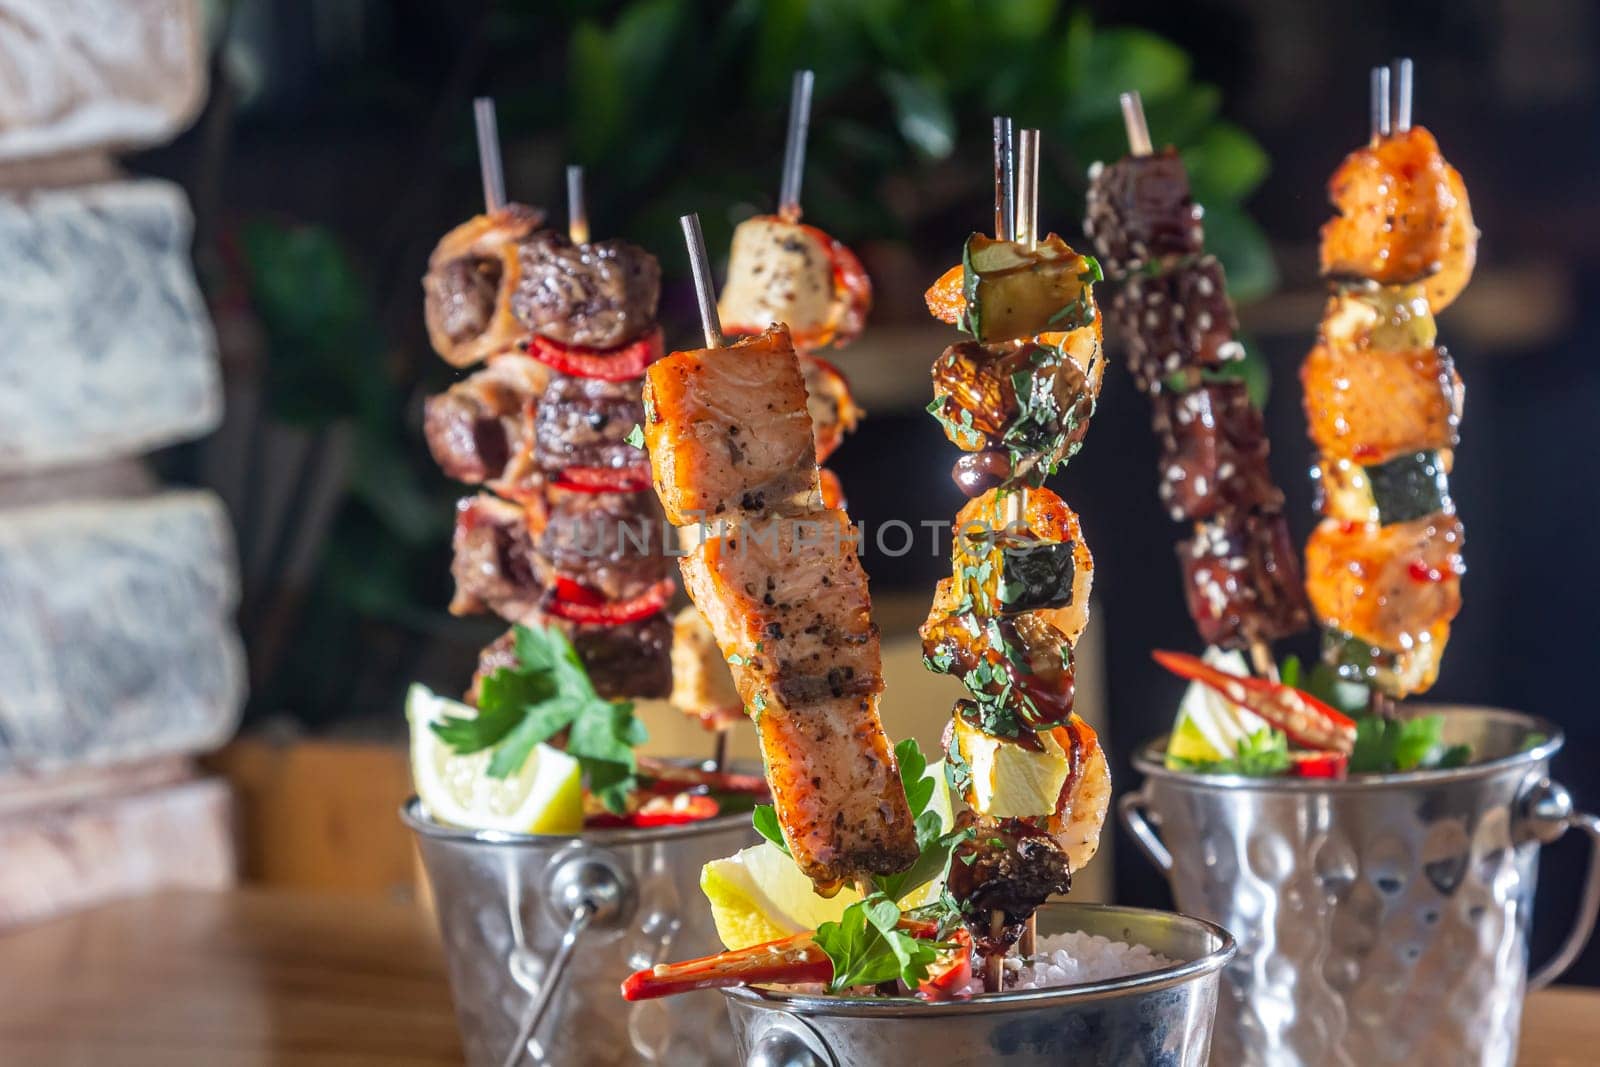 A lot of mini-kebabs of meat, fish, chicken, shrimp, vegetables on wooden skewers.